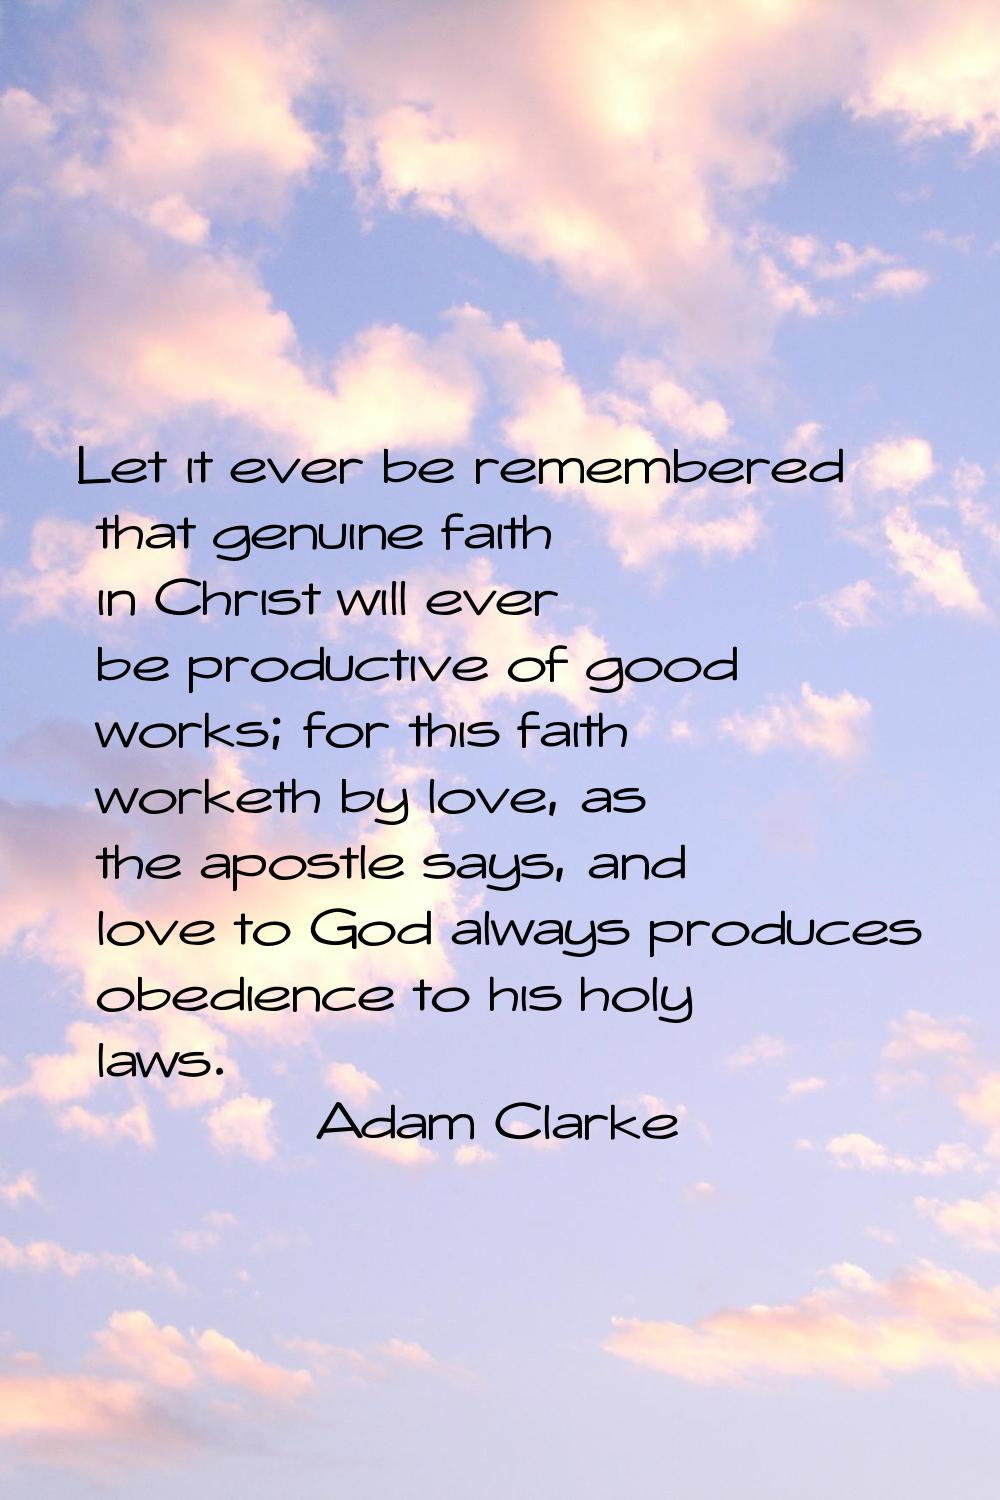 Let it ever be remembered that genuine faith in Christ will ever be productive of good works; for t